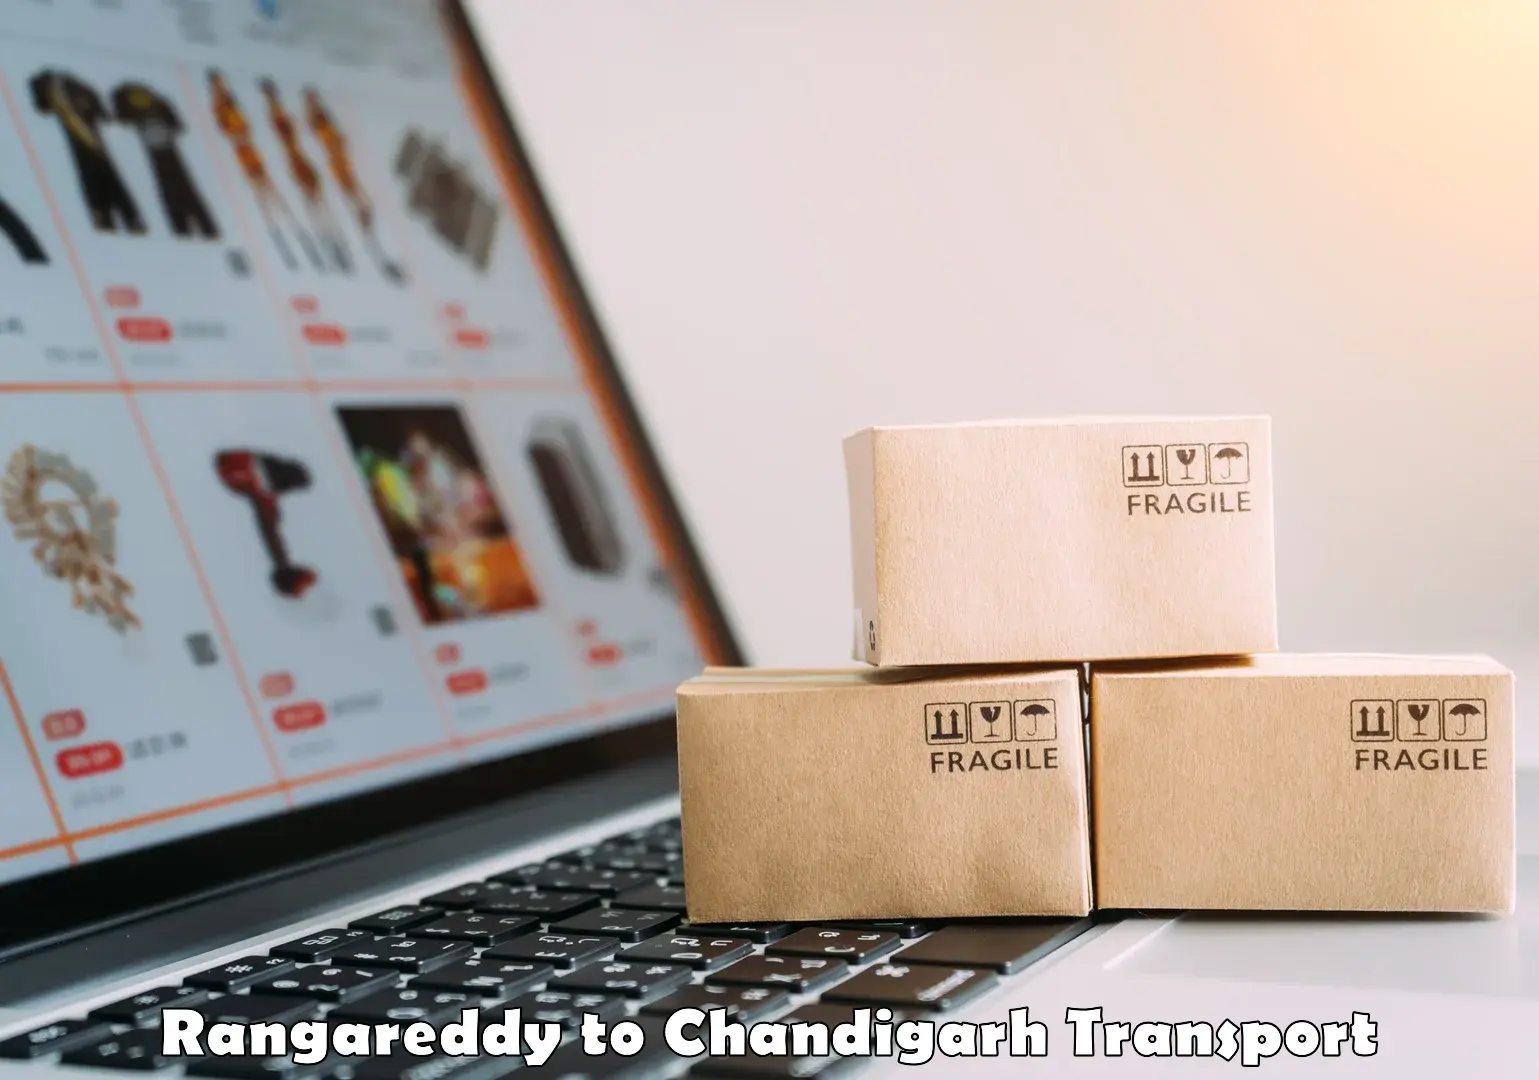 Express transport services Rangareddy to Chandigarh